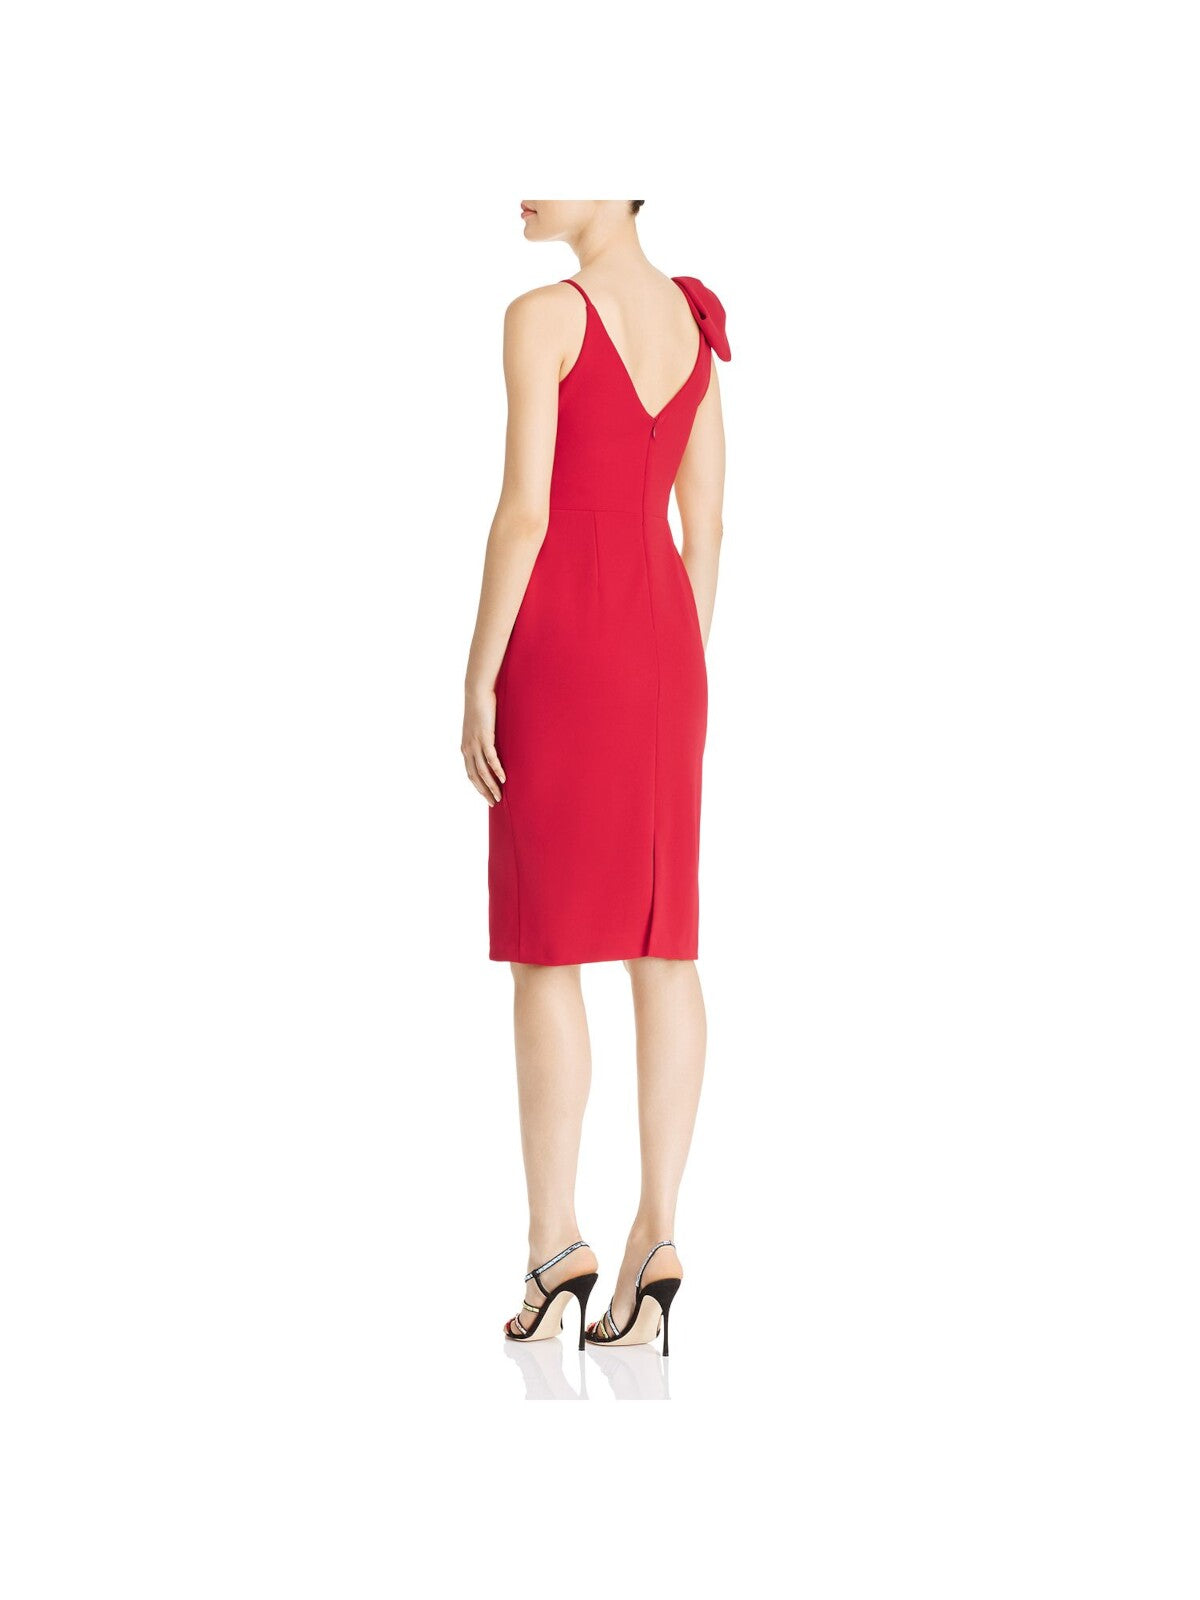 AVERY G Womens Red Stretch Zippered Darted Bow-accent Sleeveless V Neck Knee Length Formal Sheath Dress 4